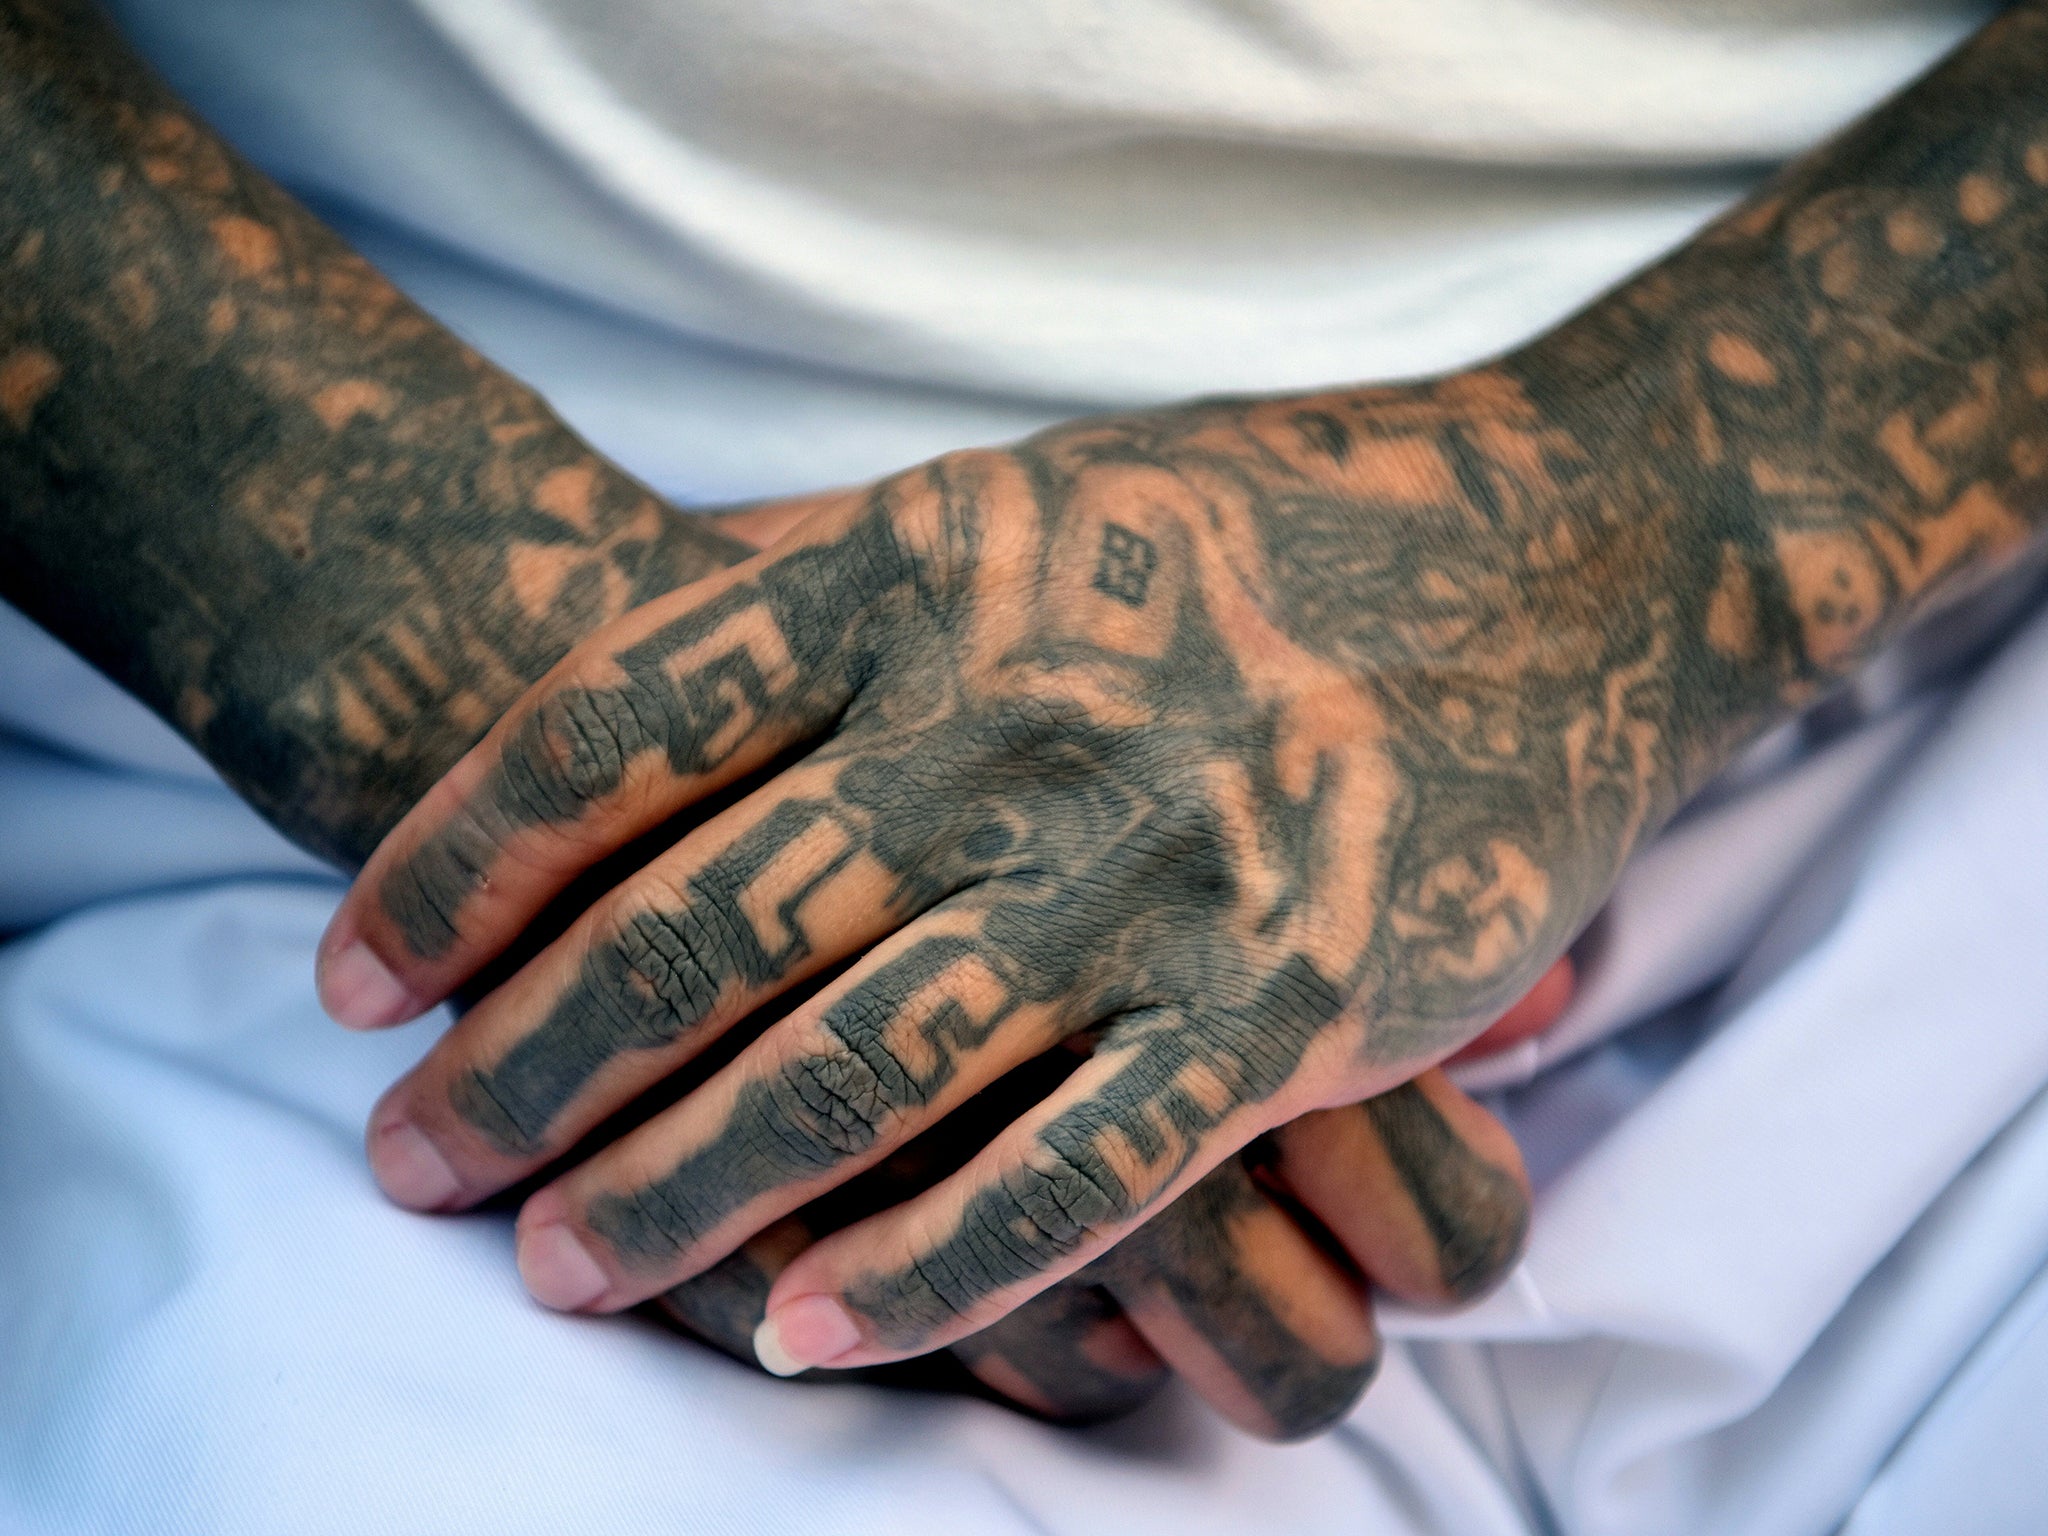 For the young men of MS-13, there is honour in brutality, barbarity and sacrifice